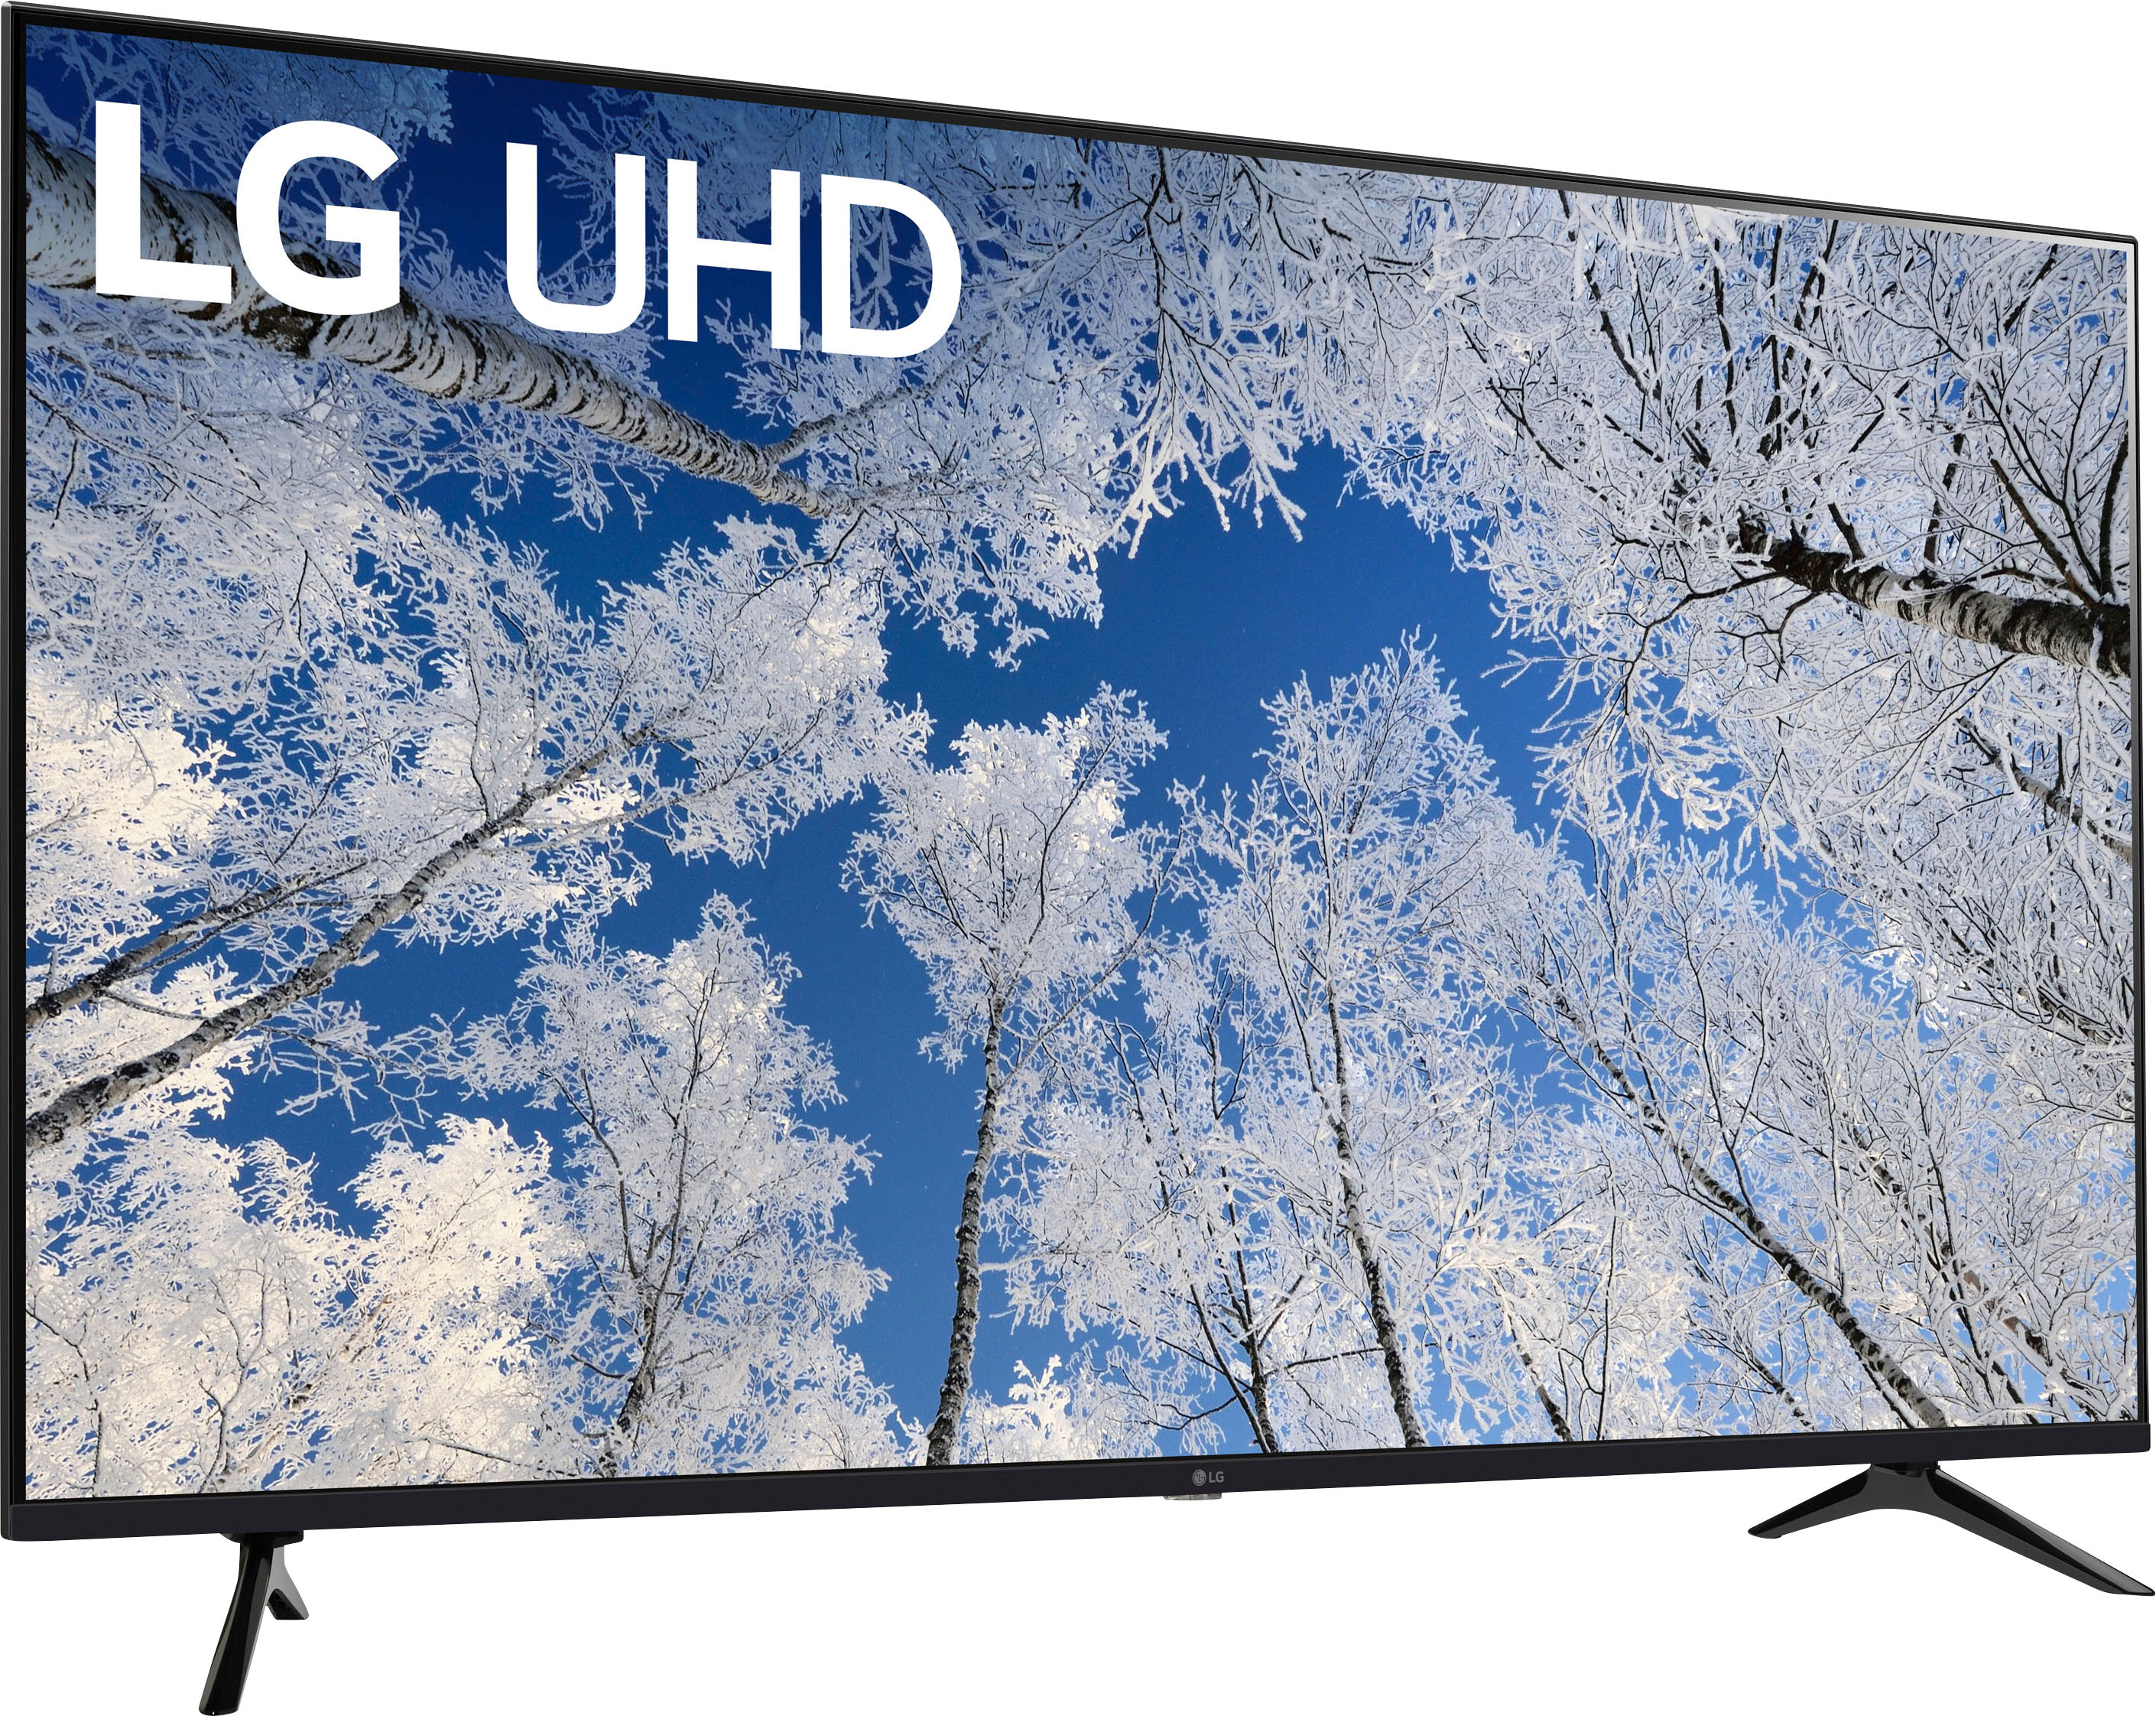 5 Important Questions to Ask Before Buying an LED TV – Reason